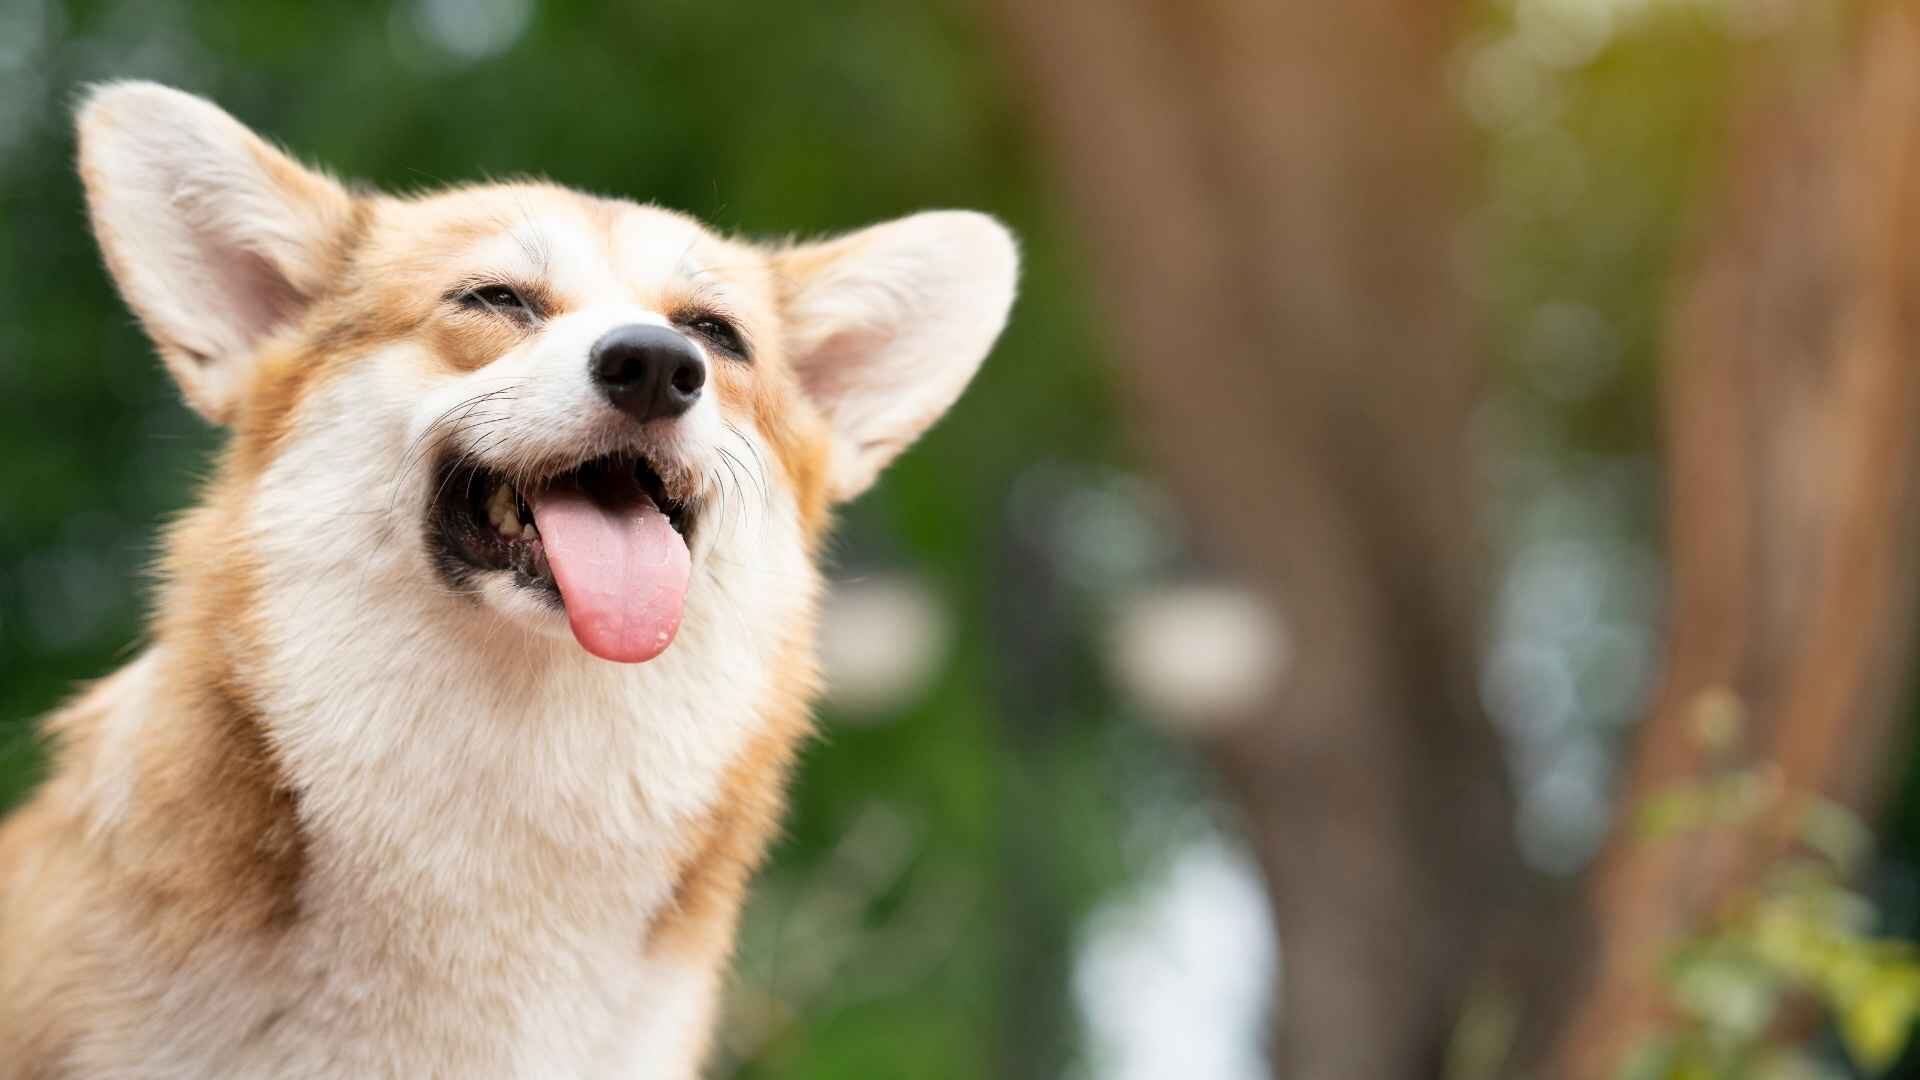 Are Corgis Good Apartment Dogs: Guide to Know Before Getting